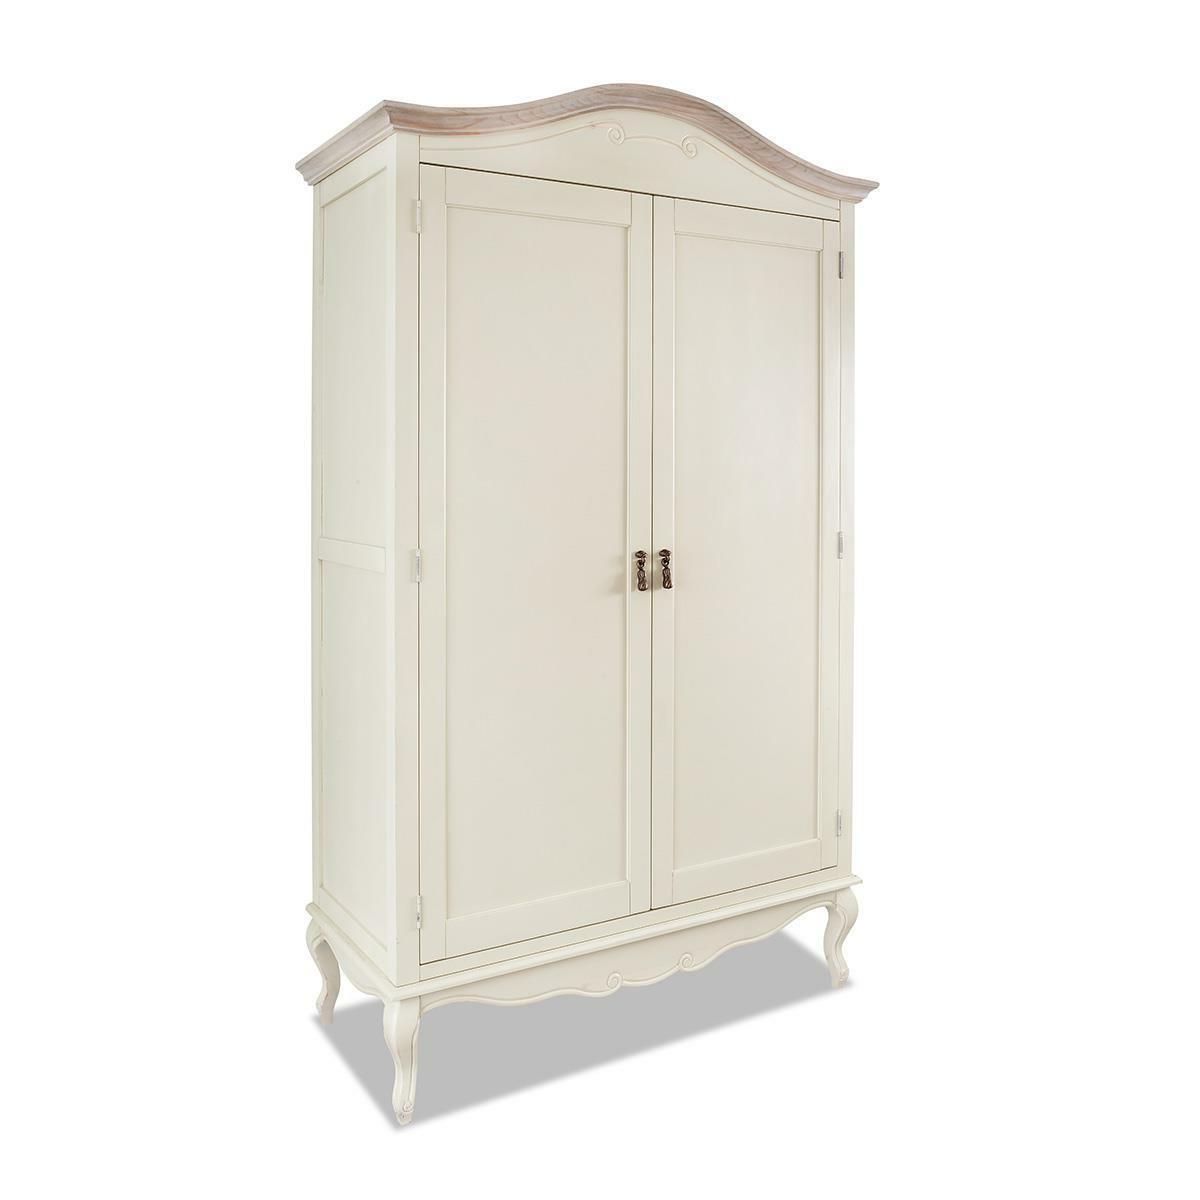 Cream Double Wardrobe French Large 2 Door Shabby Chic Bedroom Furniture  Juliette | Ebay With Cream French Wardrobes (View 4 of 20)